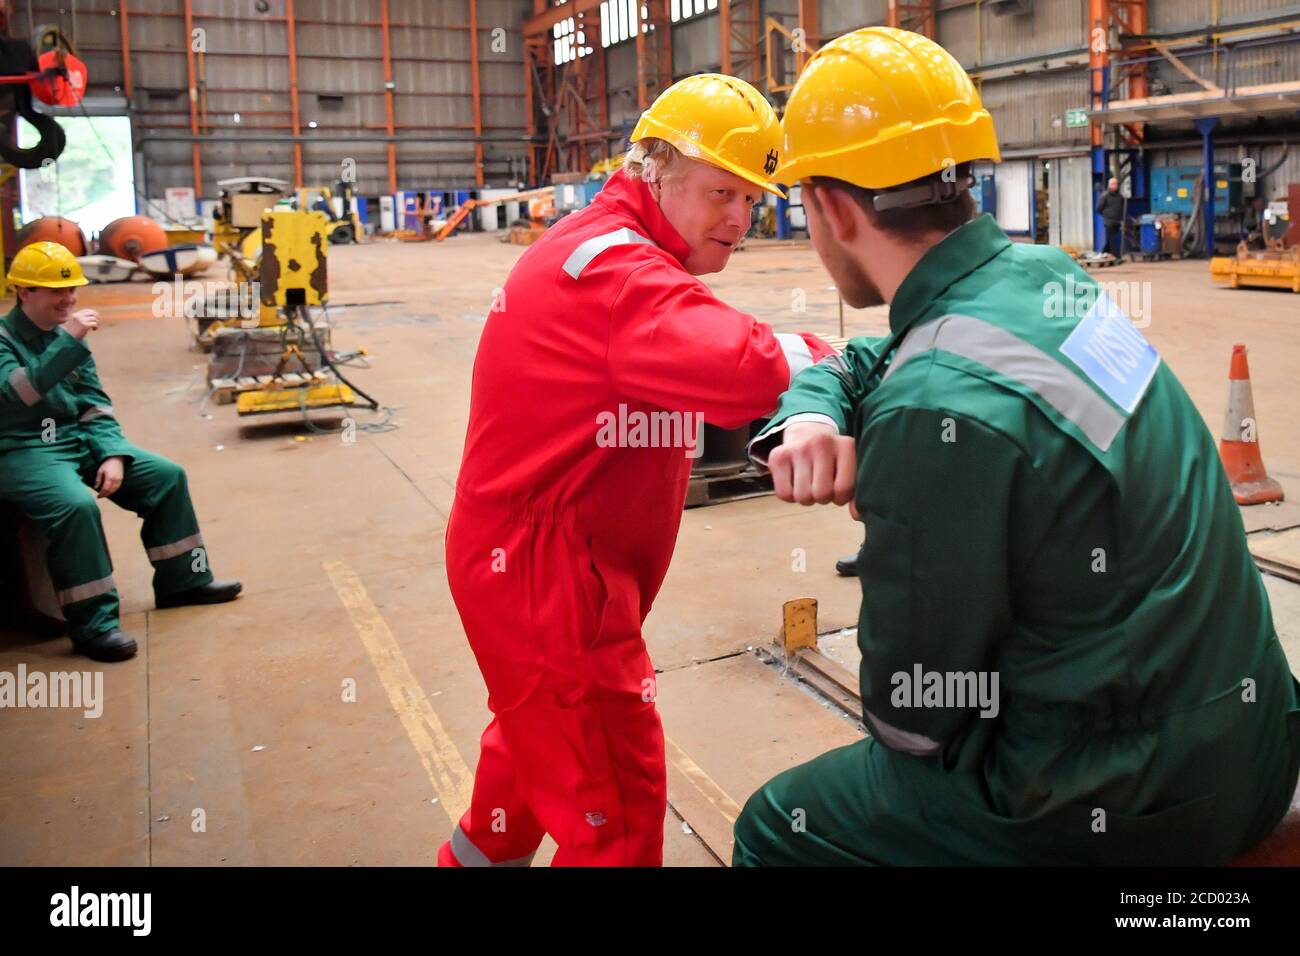 Prime Minister Boris Johnson greets students from Petroc college in Braunton, with an elbow-bump during his visit to Appledore Shipyard in Devon which was bought by InfraStrata, the firm which also owns Belfast's Harland & Wolff (H&W), in a £7 million deal. Stock Photo